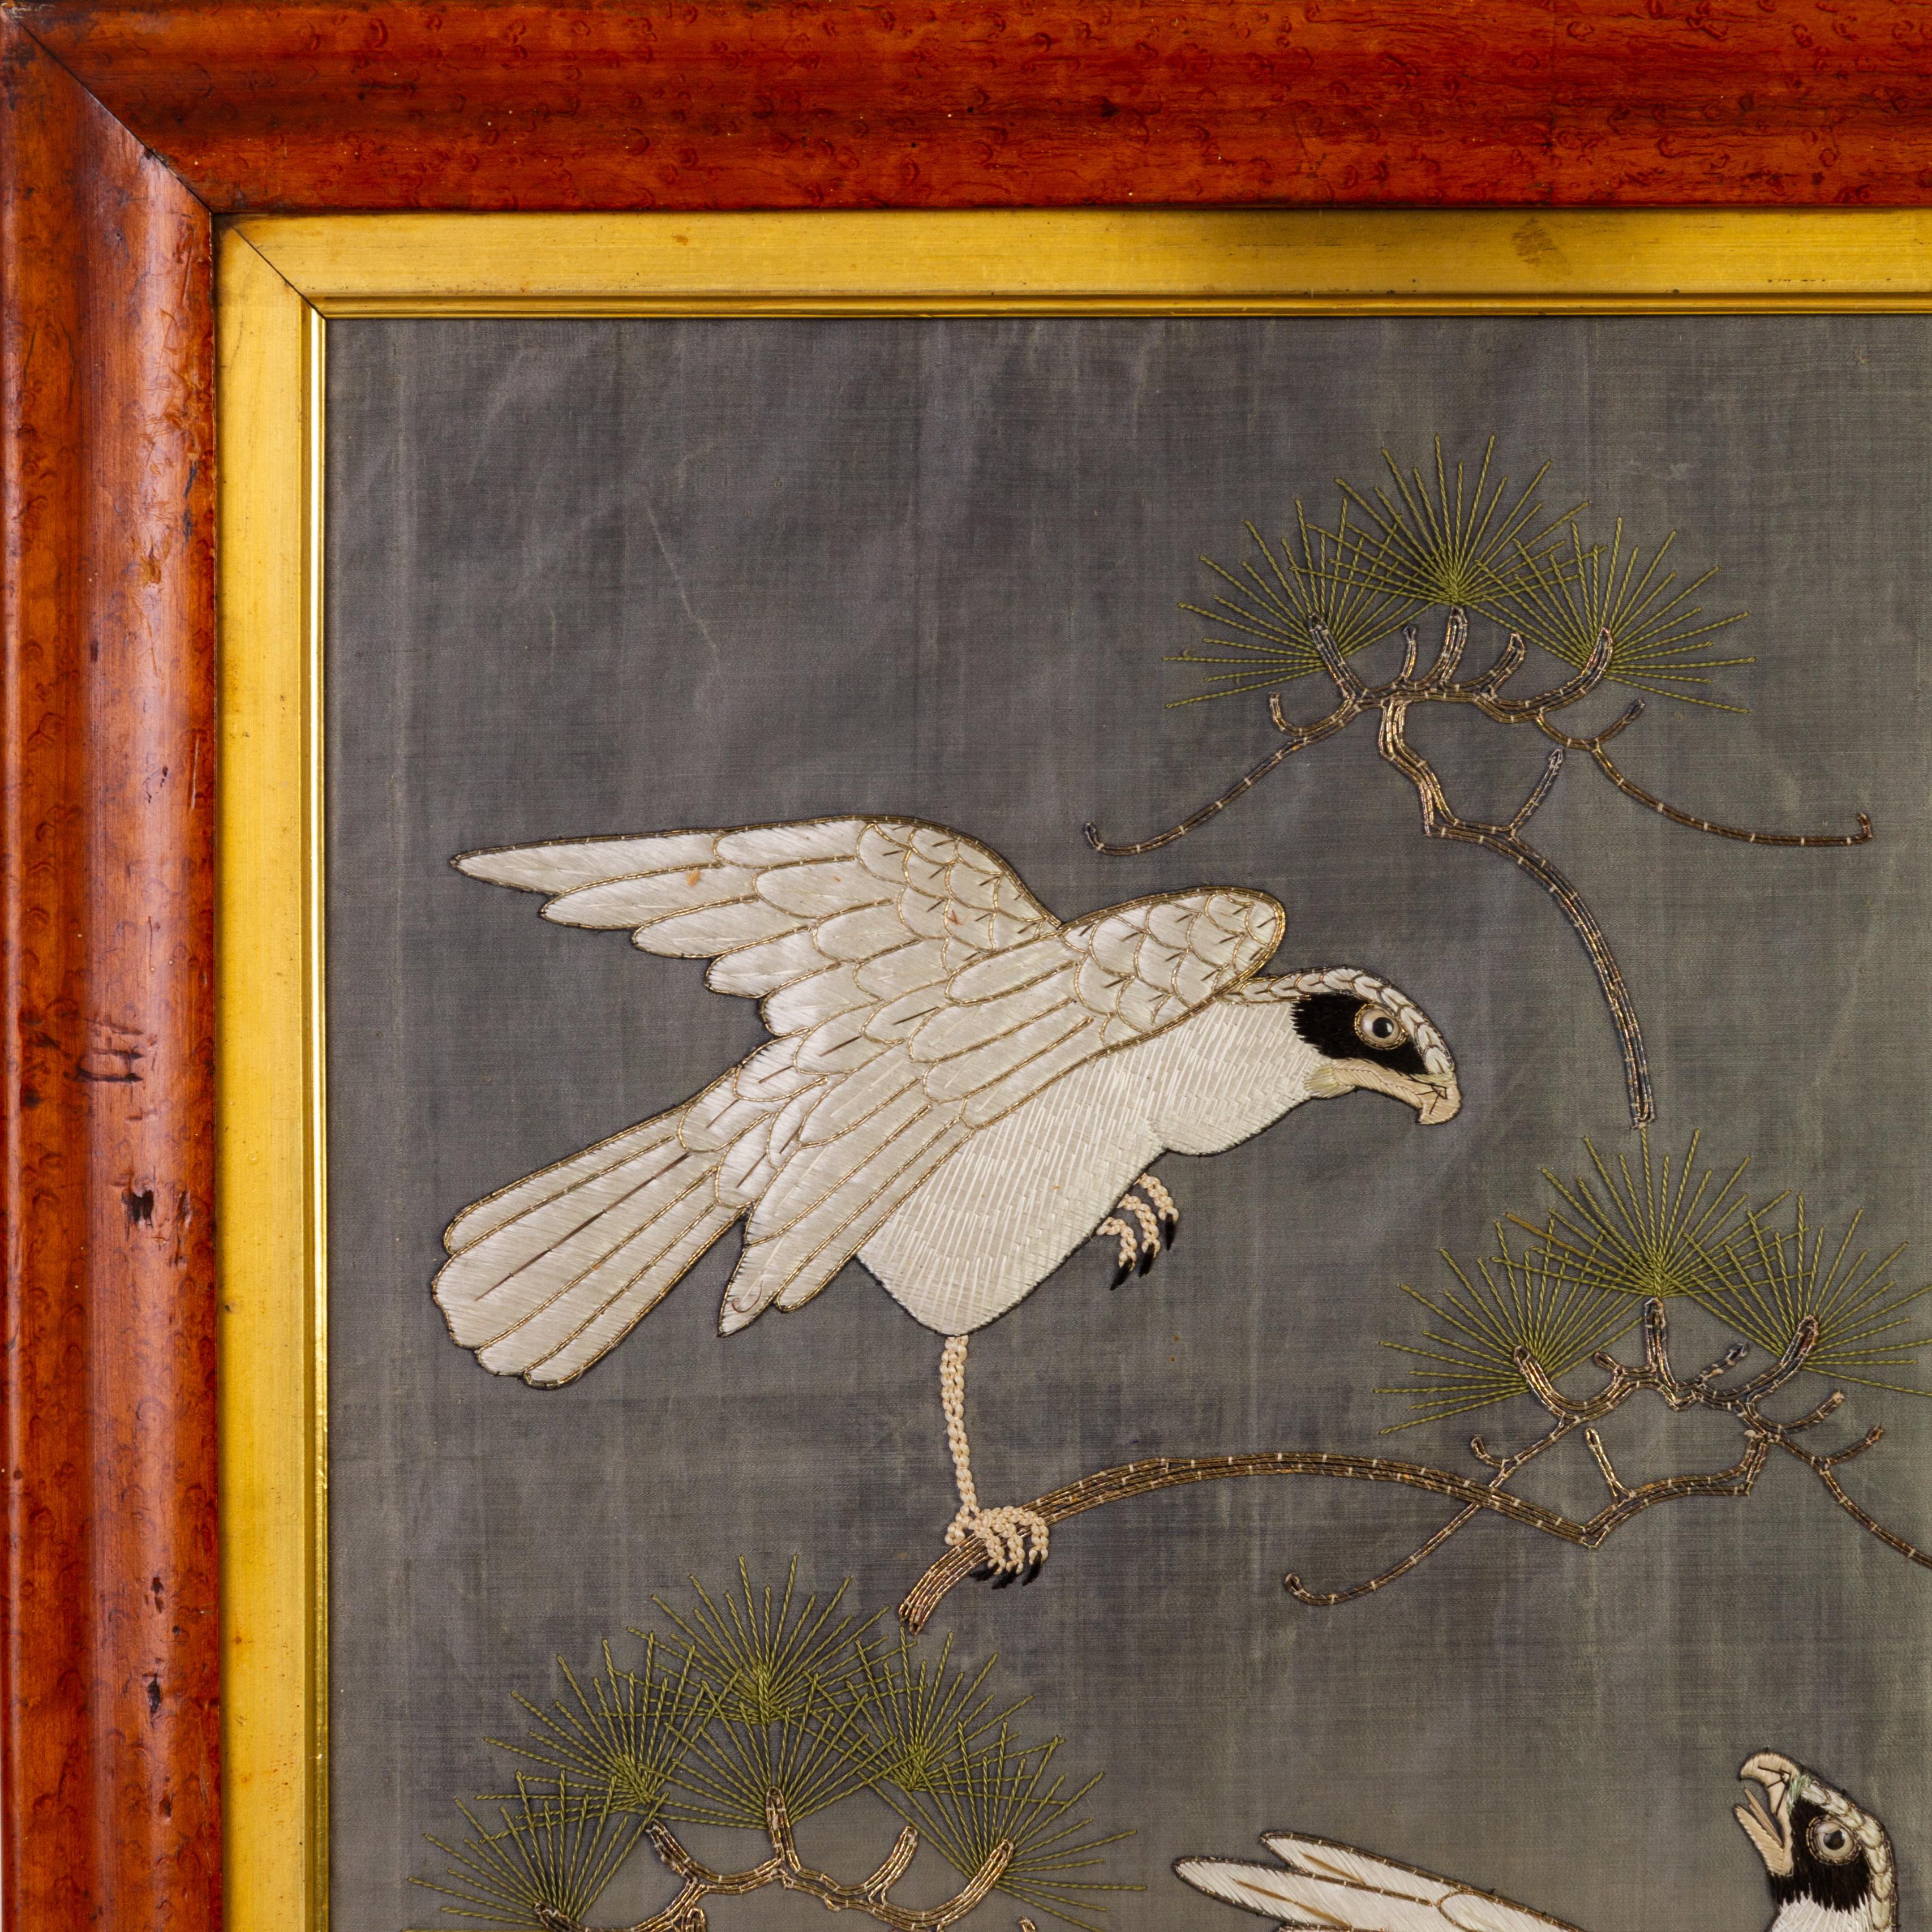 Japanese Meiji Finely Embroidered Silk Hawks in Maple Frame 19th Century
Good condition.
From a private collection.
Free international shipping.